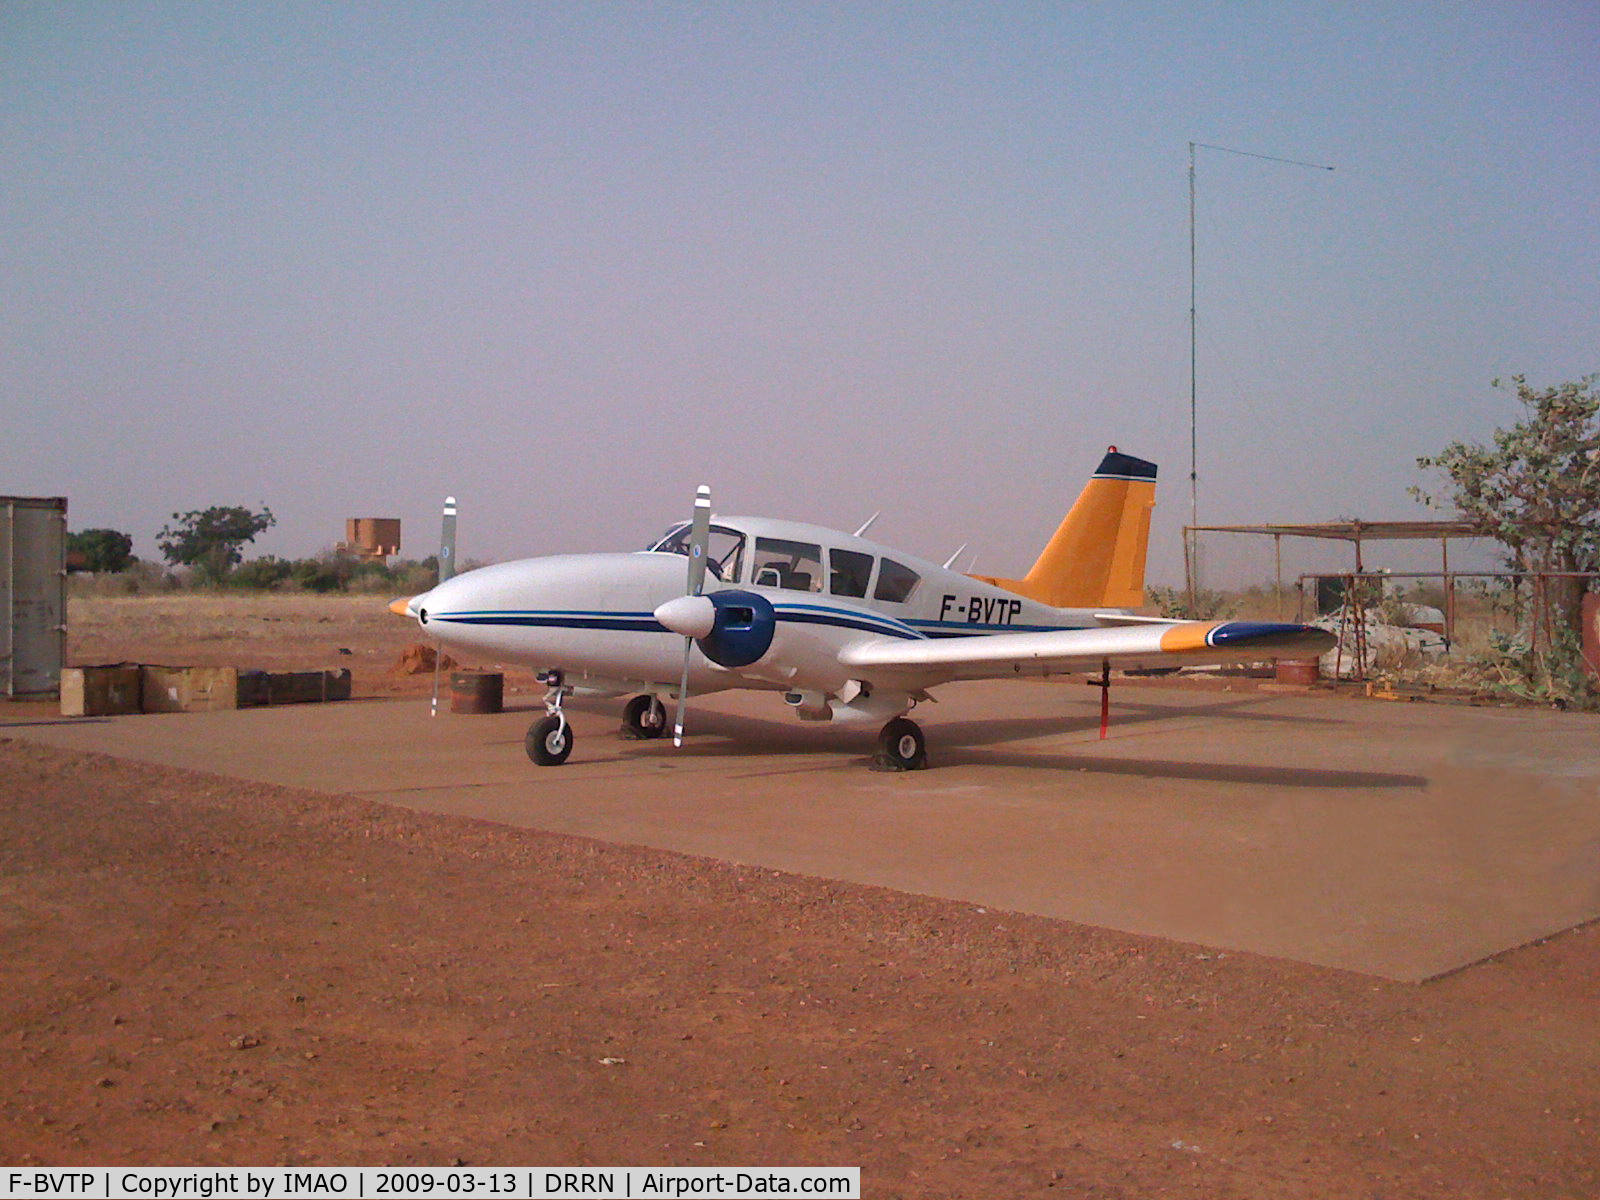 F-BVTP, Piper PA-23-250 Aztec C/N 273901, New paintings for this bird (thanks to Pierre F.)